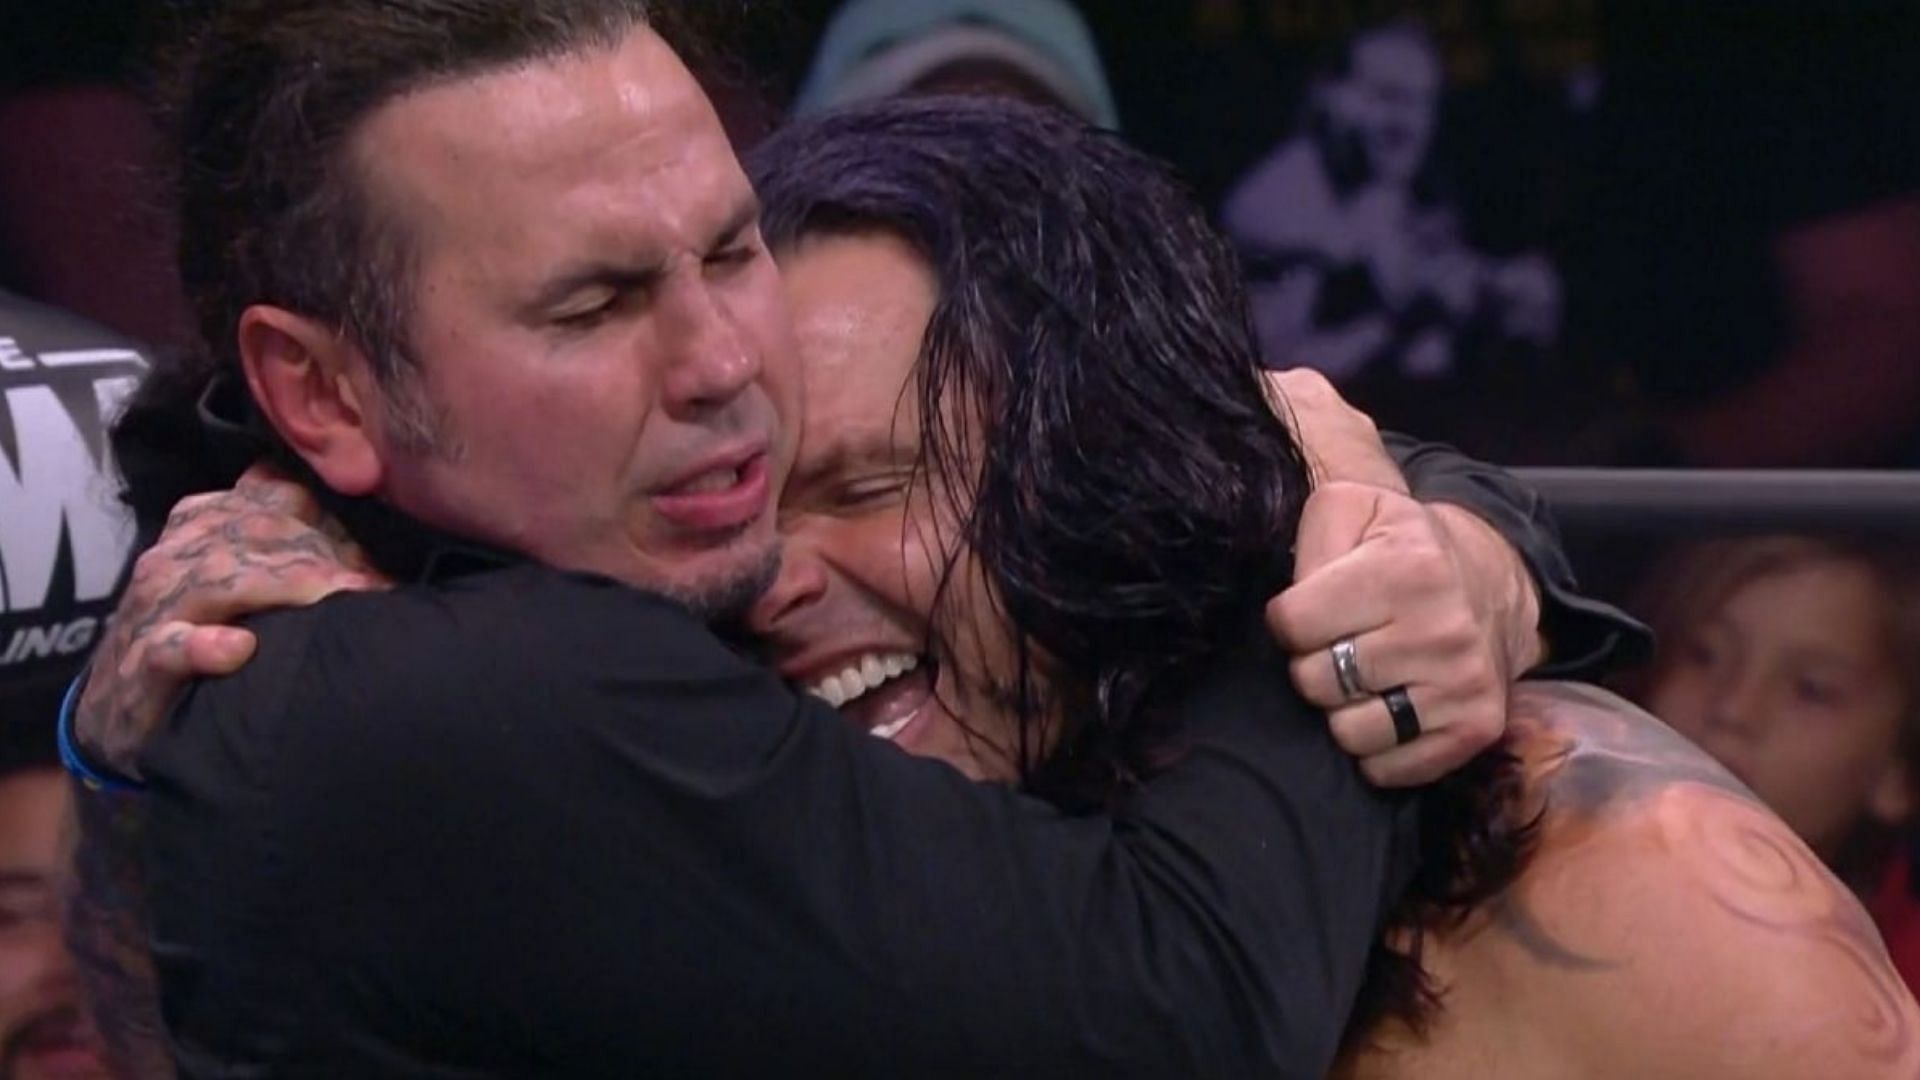 The Hardy brothers have reunited in AEW